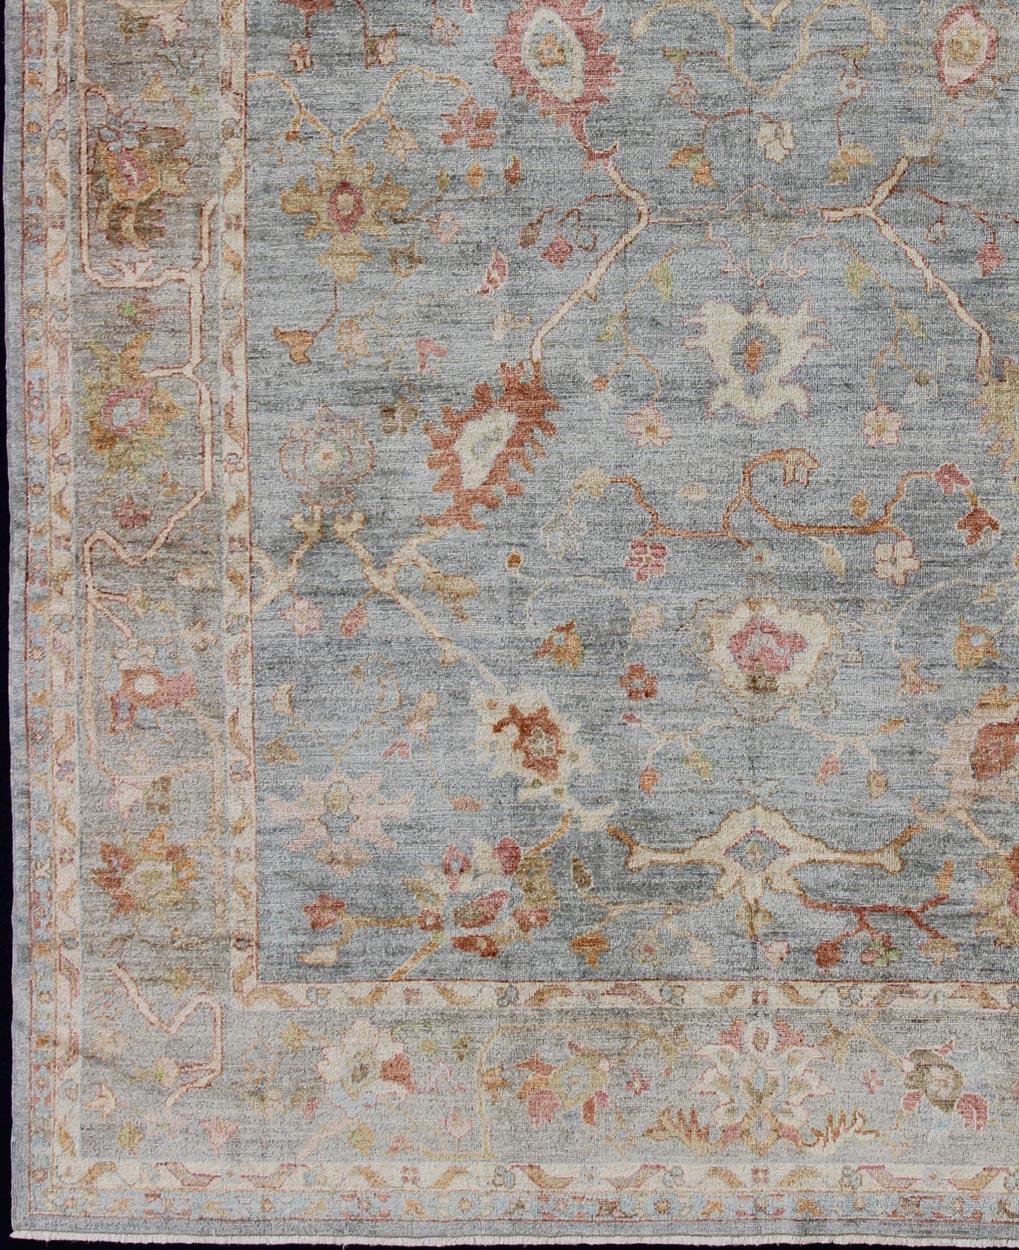 light blue, coral, and grey angora Oushak rug from Turkey, rug an-134588, country of origin / type: Turkey / Angora Oushak

From our Angora Collection, this piece is made with a combination of angora and old wool. Featuring all organic materials,